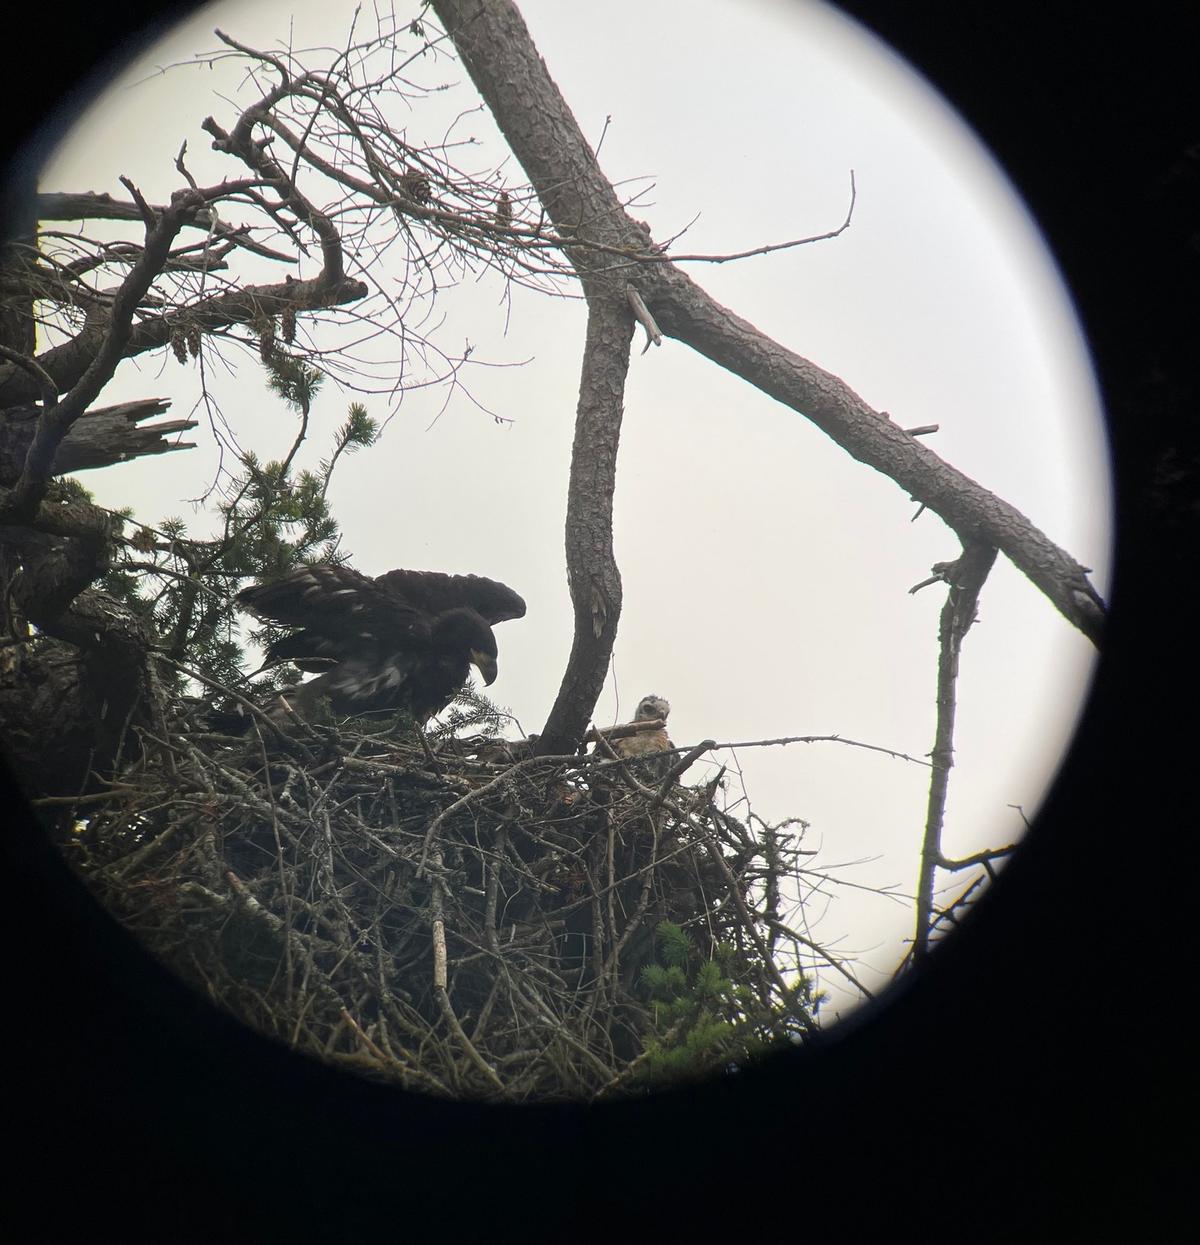 The hawklet with its much larger bald eaglet sibling. (Courtesy of <a href="https://www.facebook.com/GROWLSOFGABRIOLA/">Pam McCartney, Growls</a>)